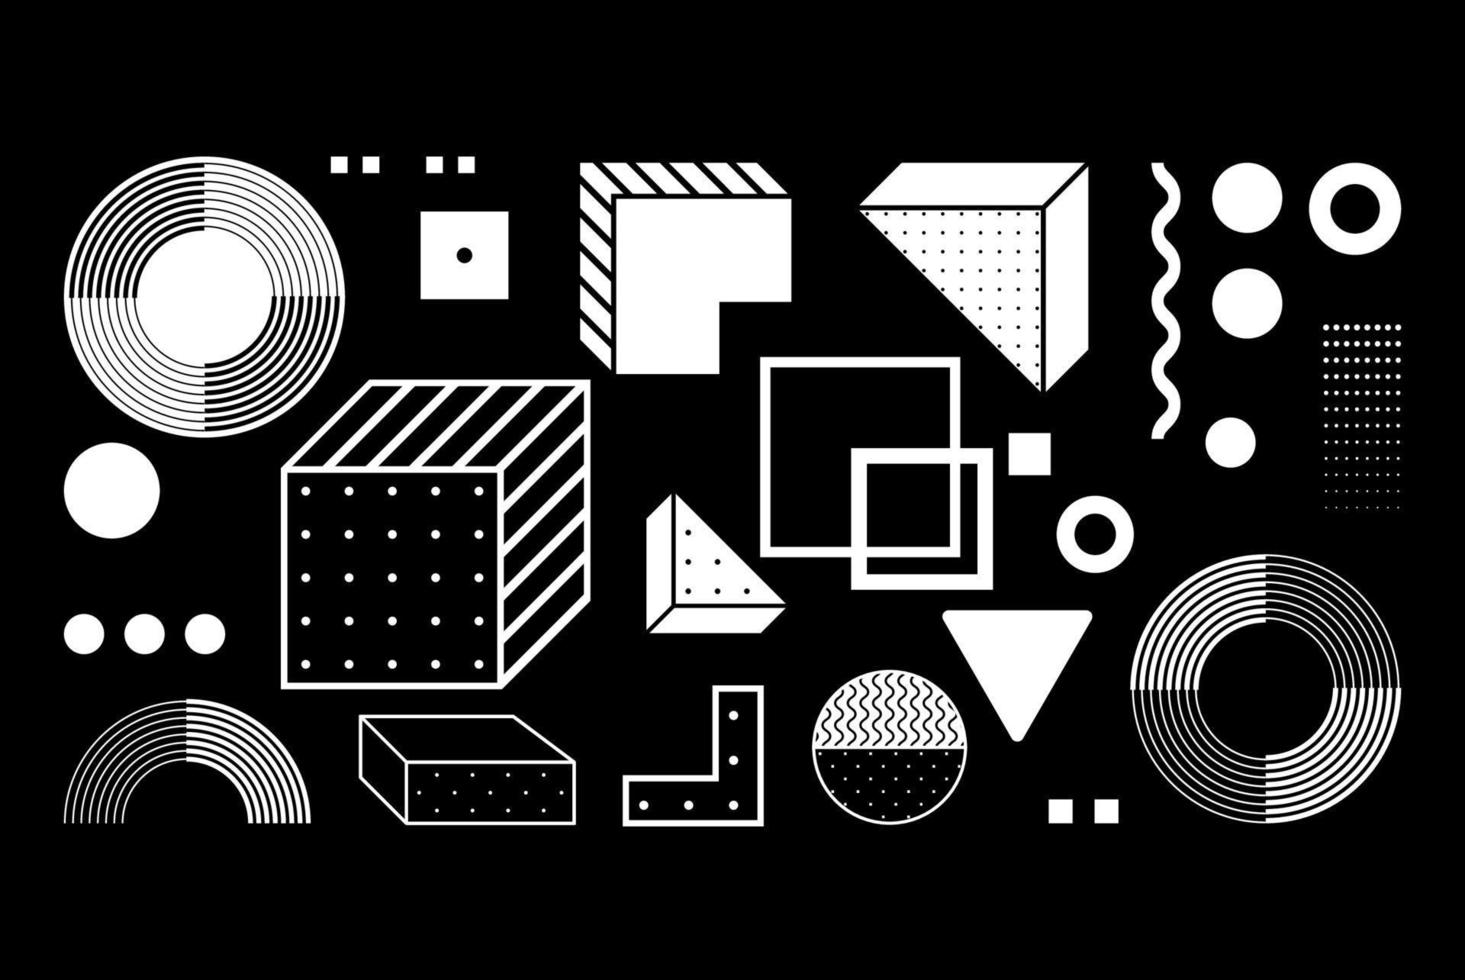 Shapes Set with Geometric Elements Composition vector